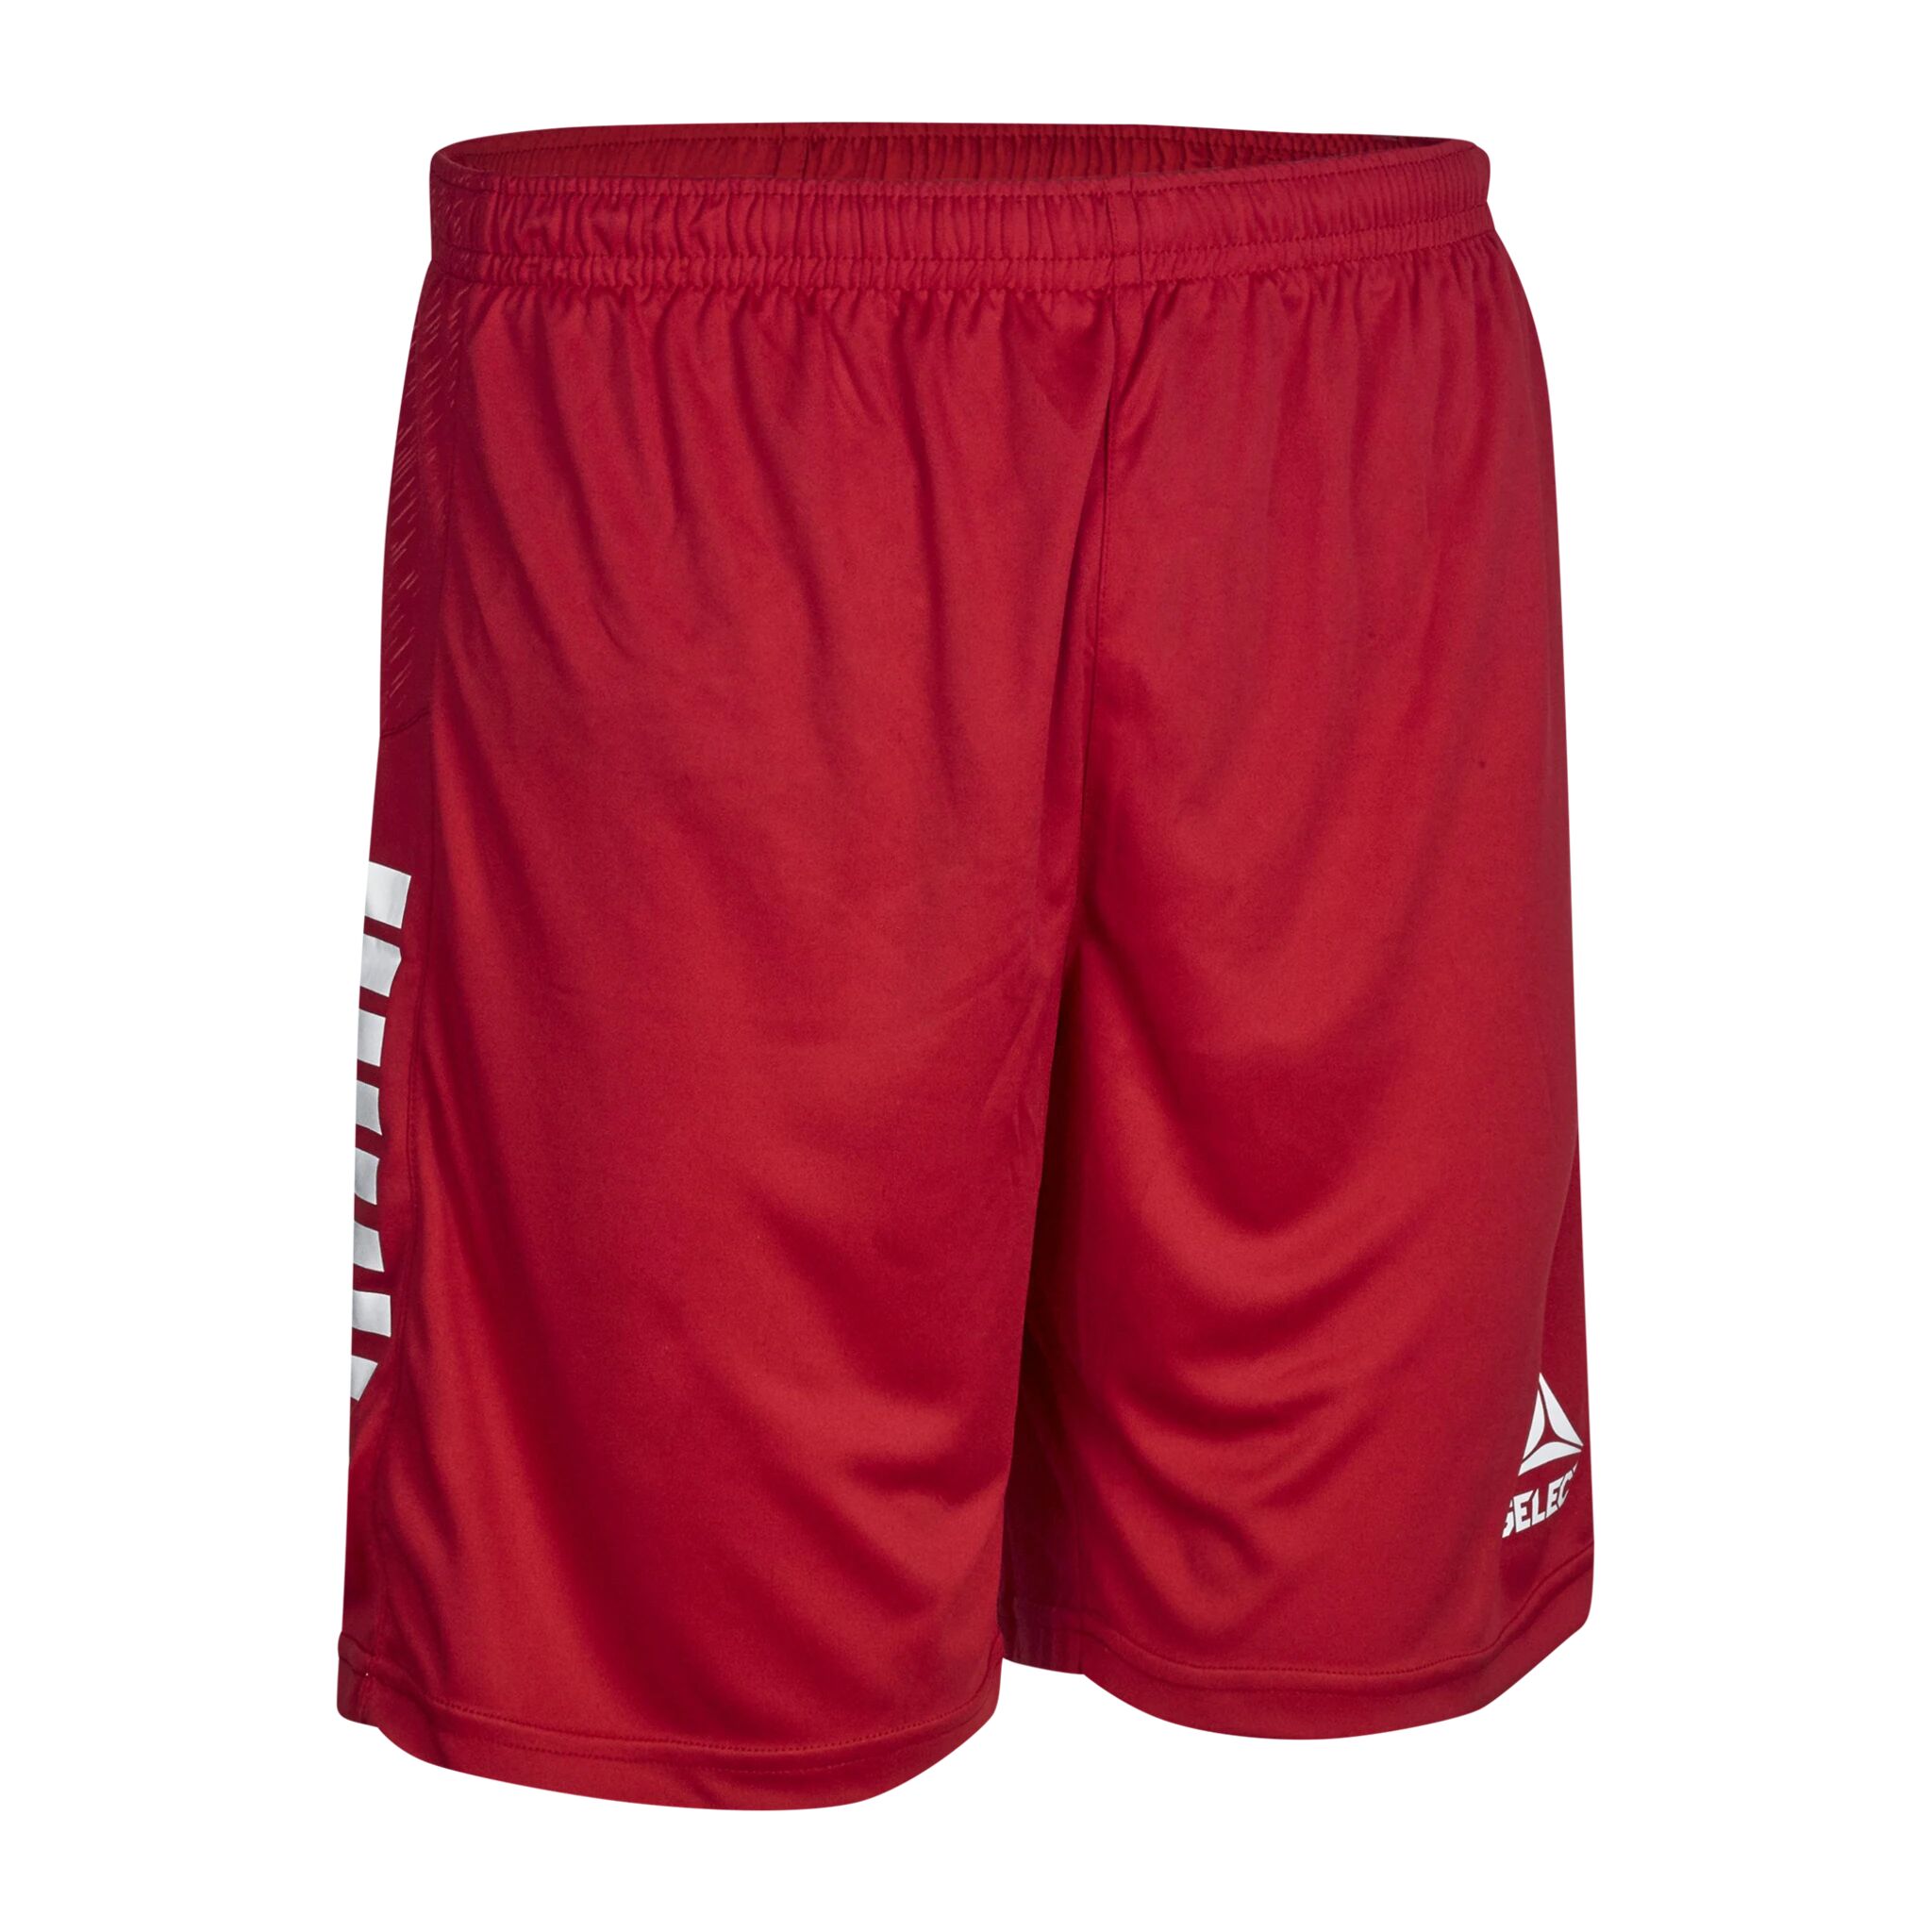 Select Player shorts Spain, shorts unisex L RED